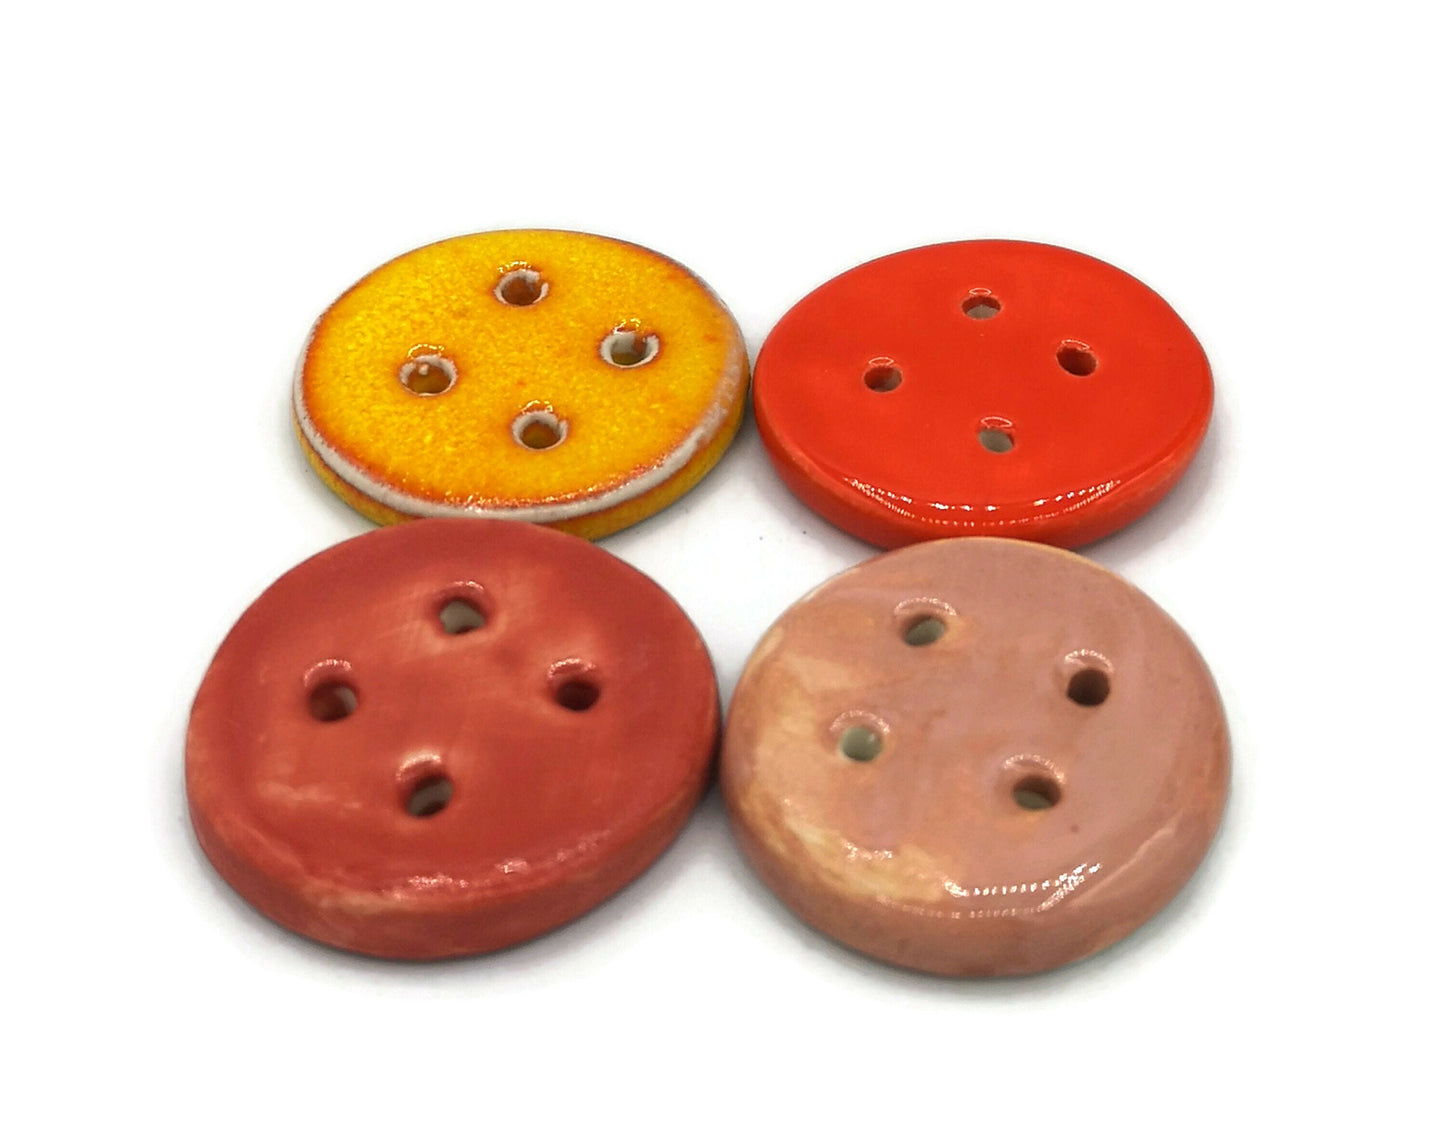 Clay Buttons Lot Of 4, Round Large Sewing Buttons, Jewelry making, Best sellers Sewing Supplies And Notions, Handmade Ceramic Unique Buttons - Ceramica Ana Rafael